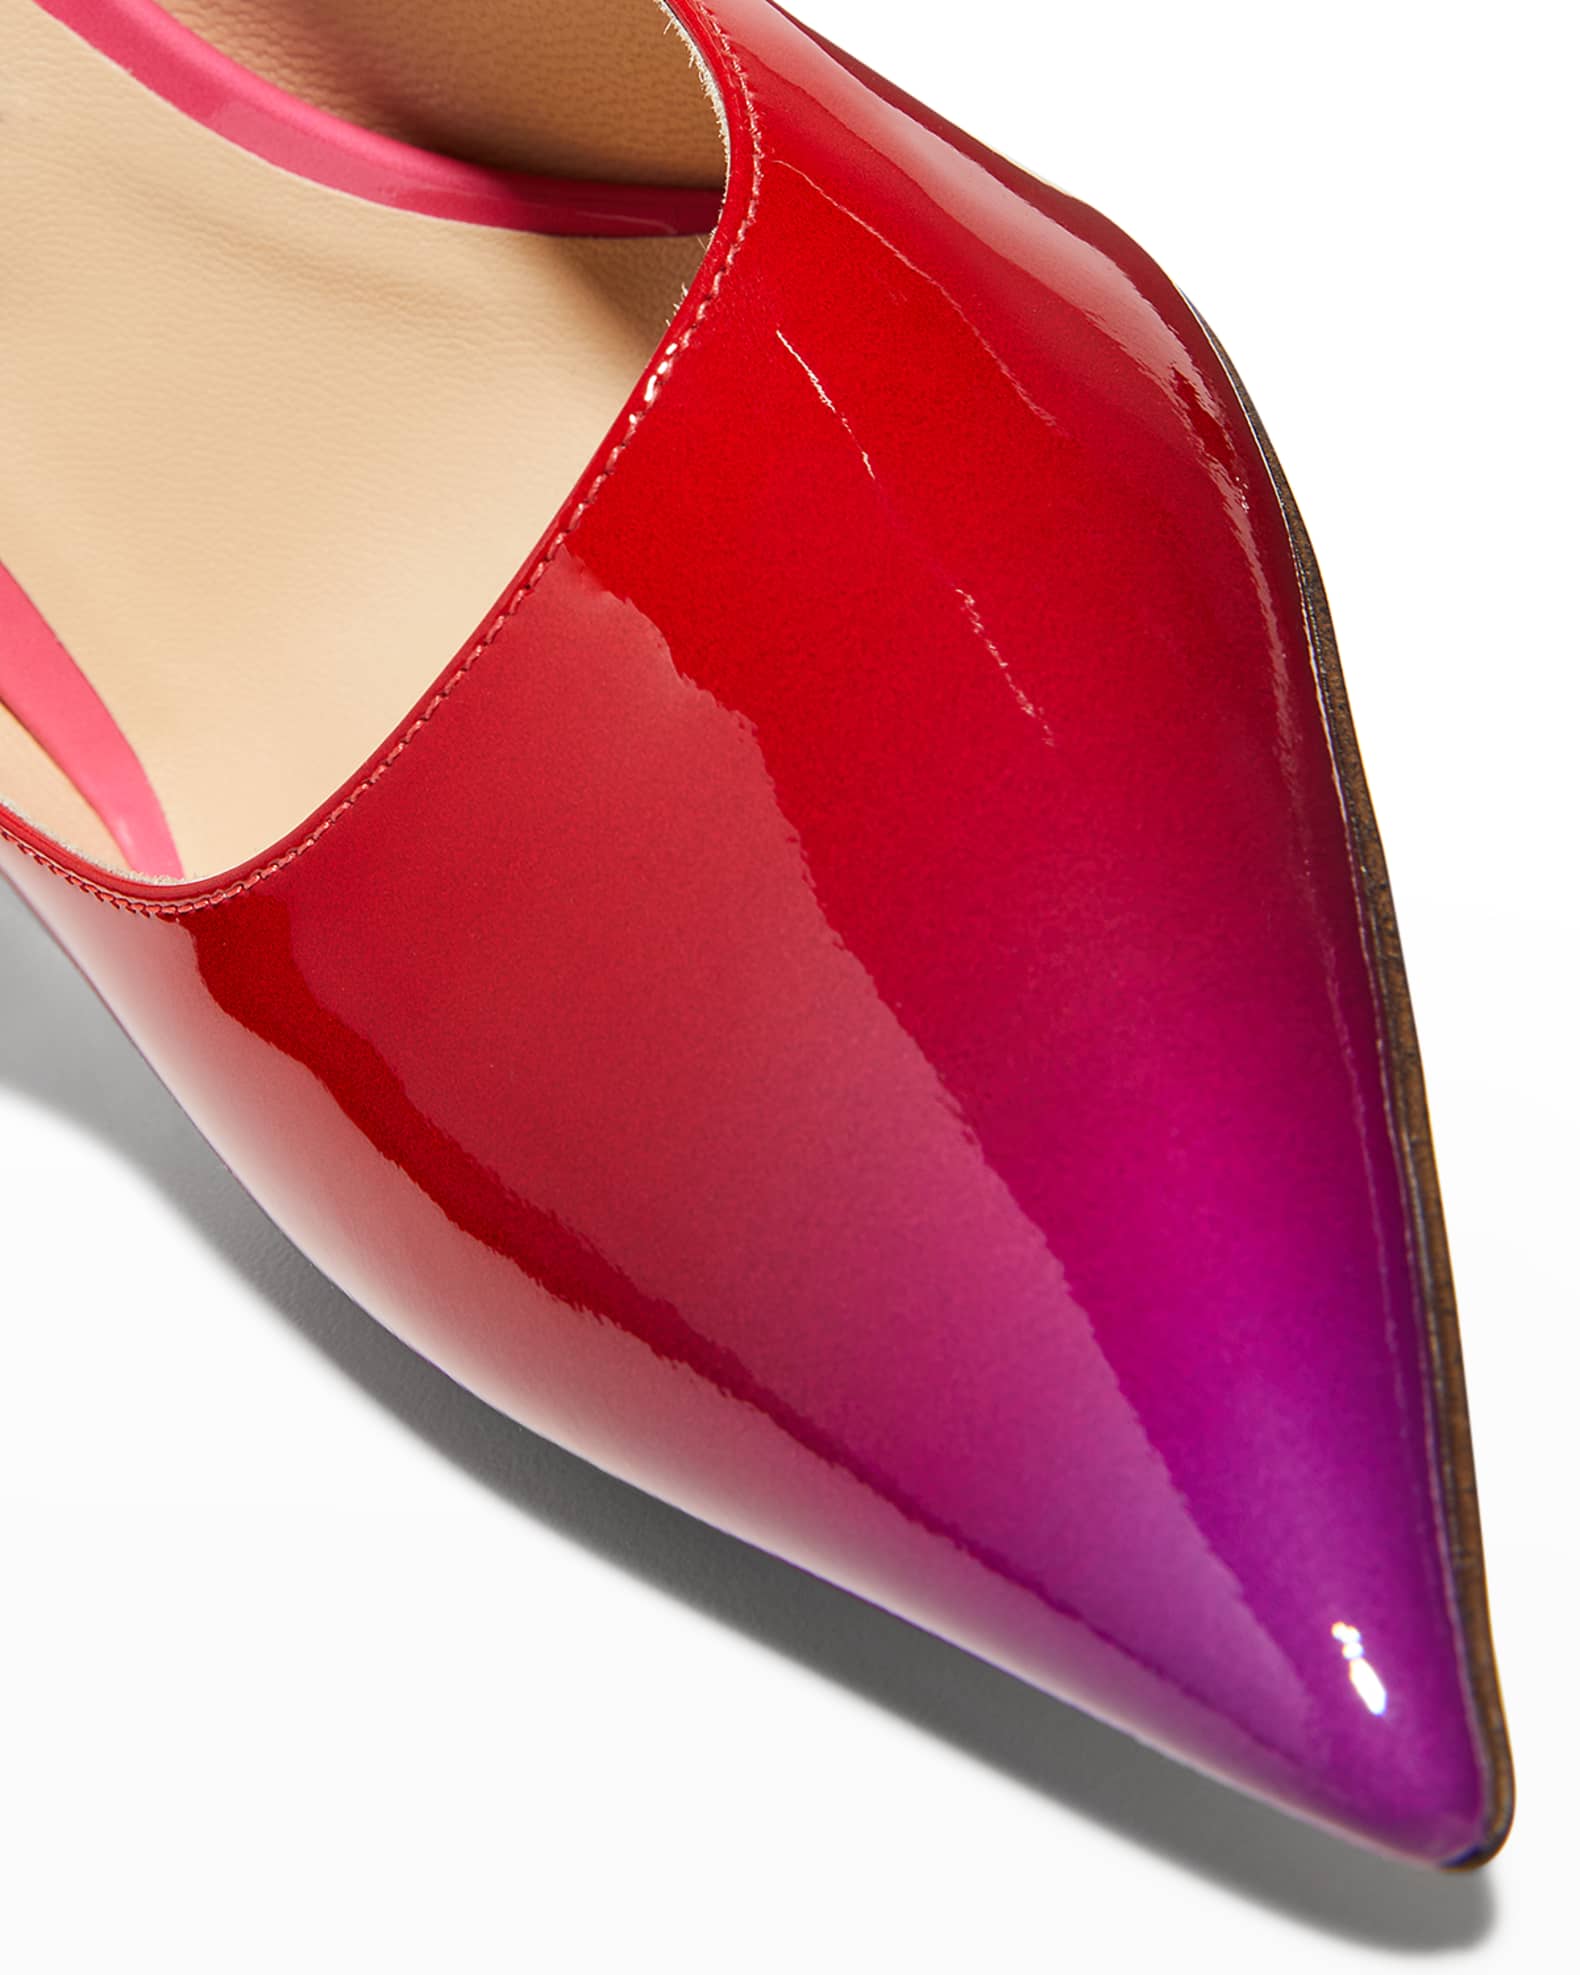 Jimmy Choo Love Ombre Leather Pumps | Neiman Marcus